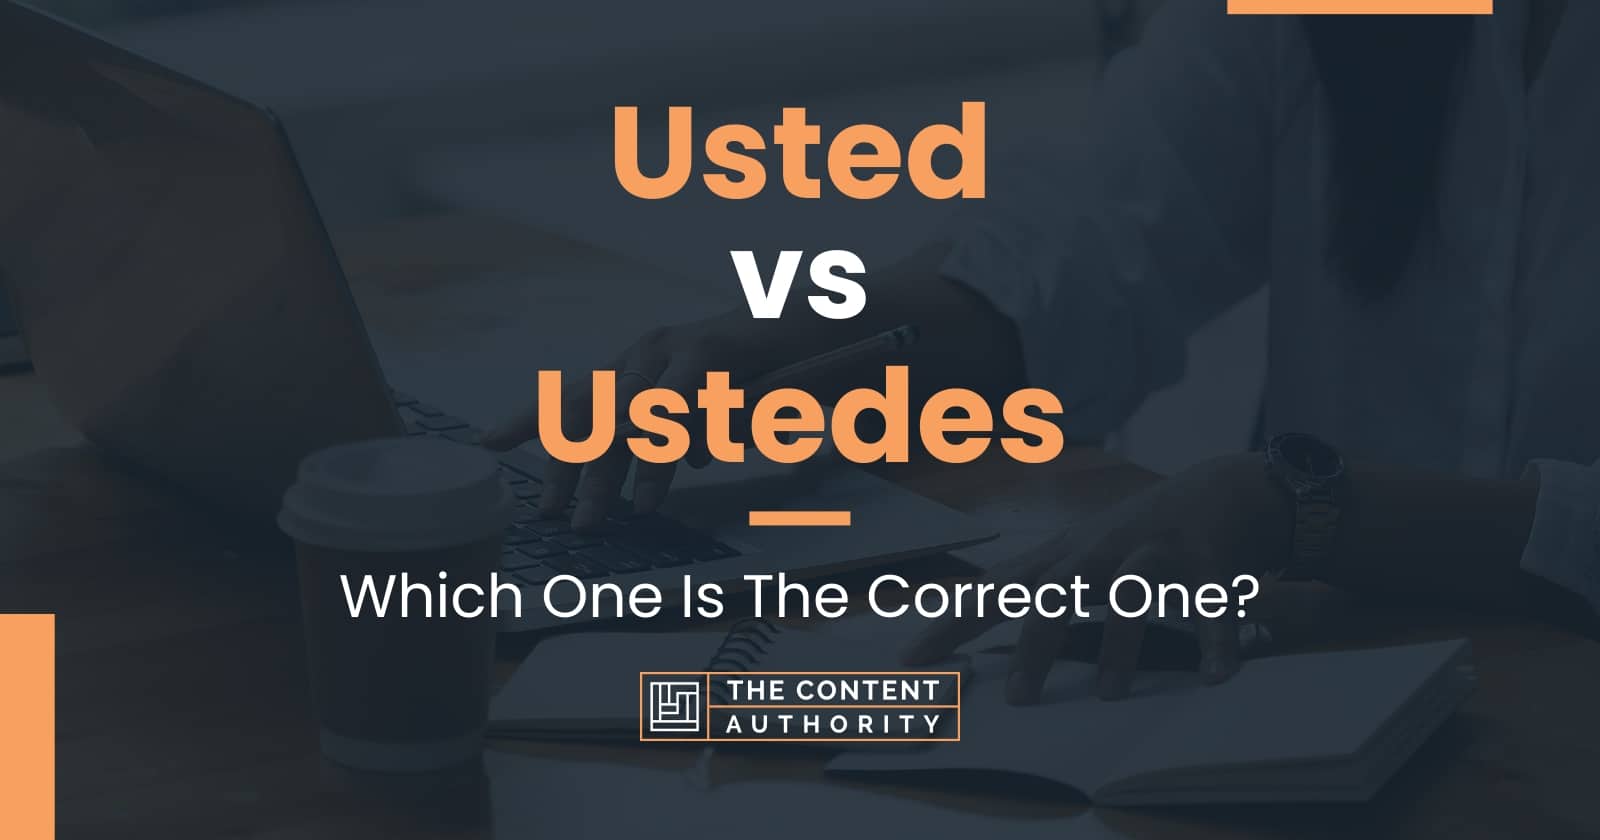 usted-vs-ustedes-which-one-is-the-correct-one